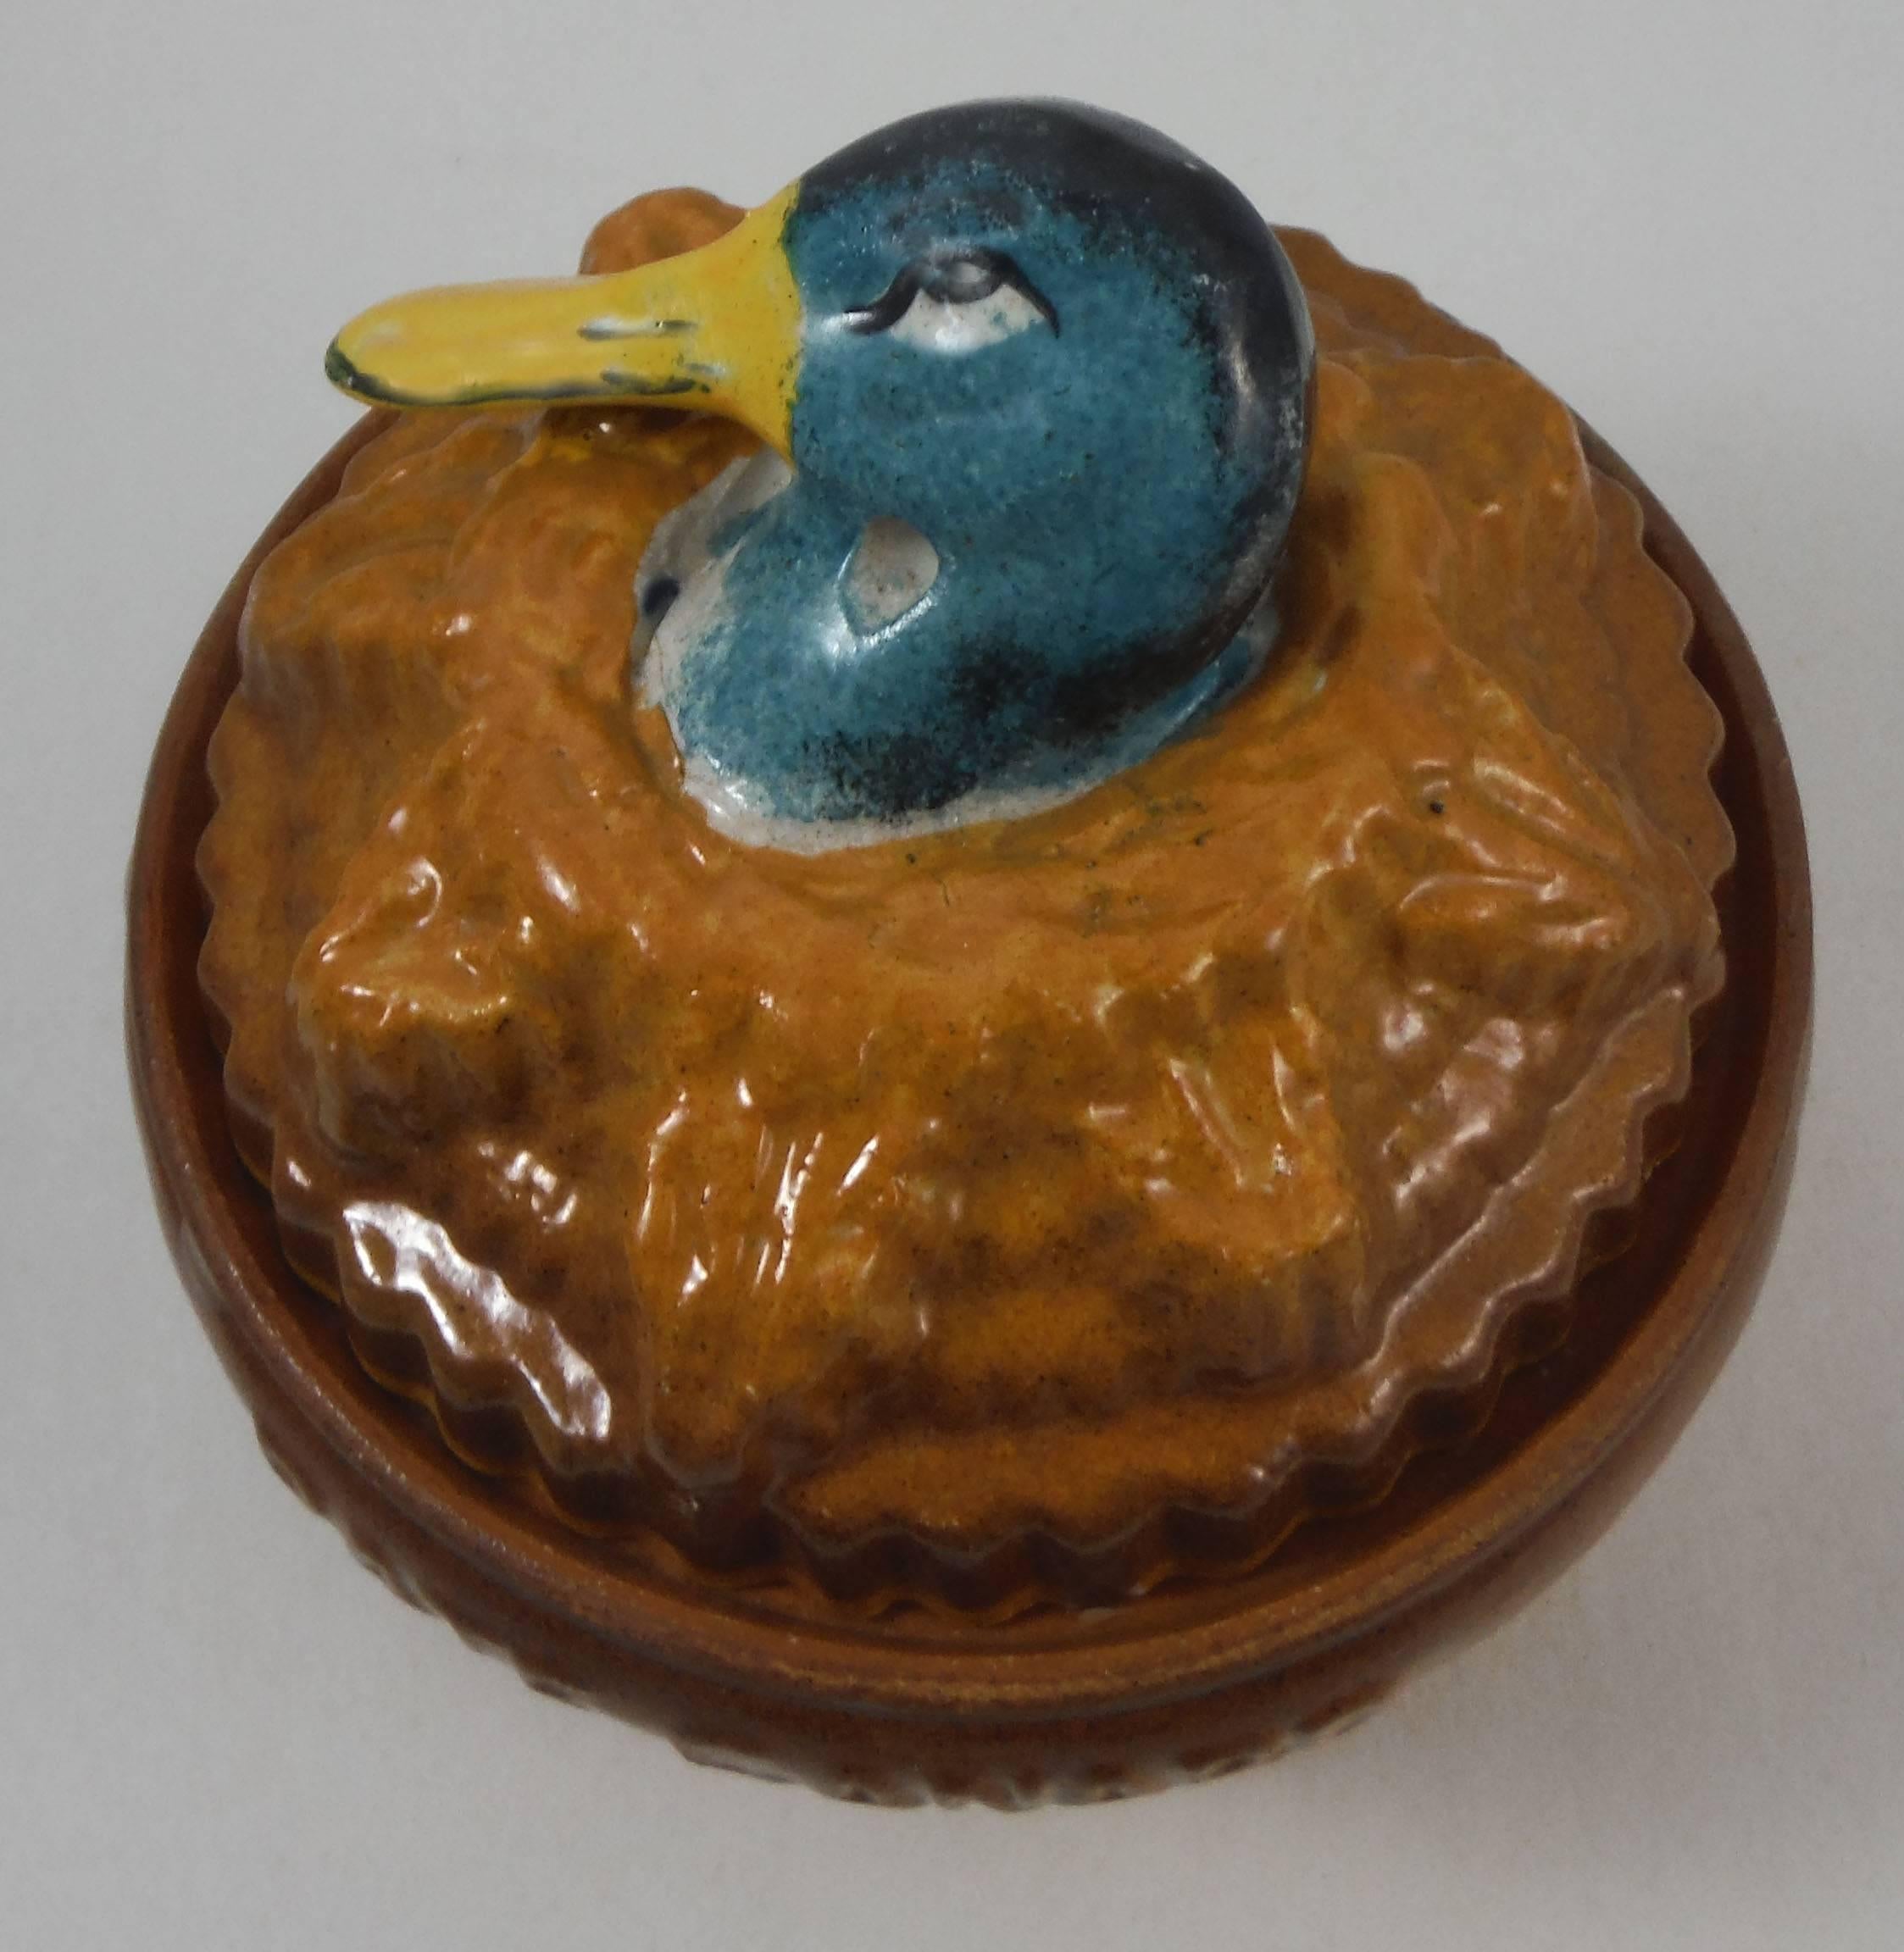 Pate duck tureen signed Georges Dreyfus for Faucon-Rouen circa 1900 in a trompe l'oeil form of pork pie with duck head handle. Minors wears.